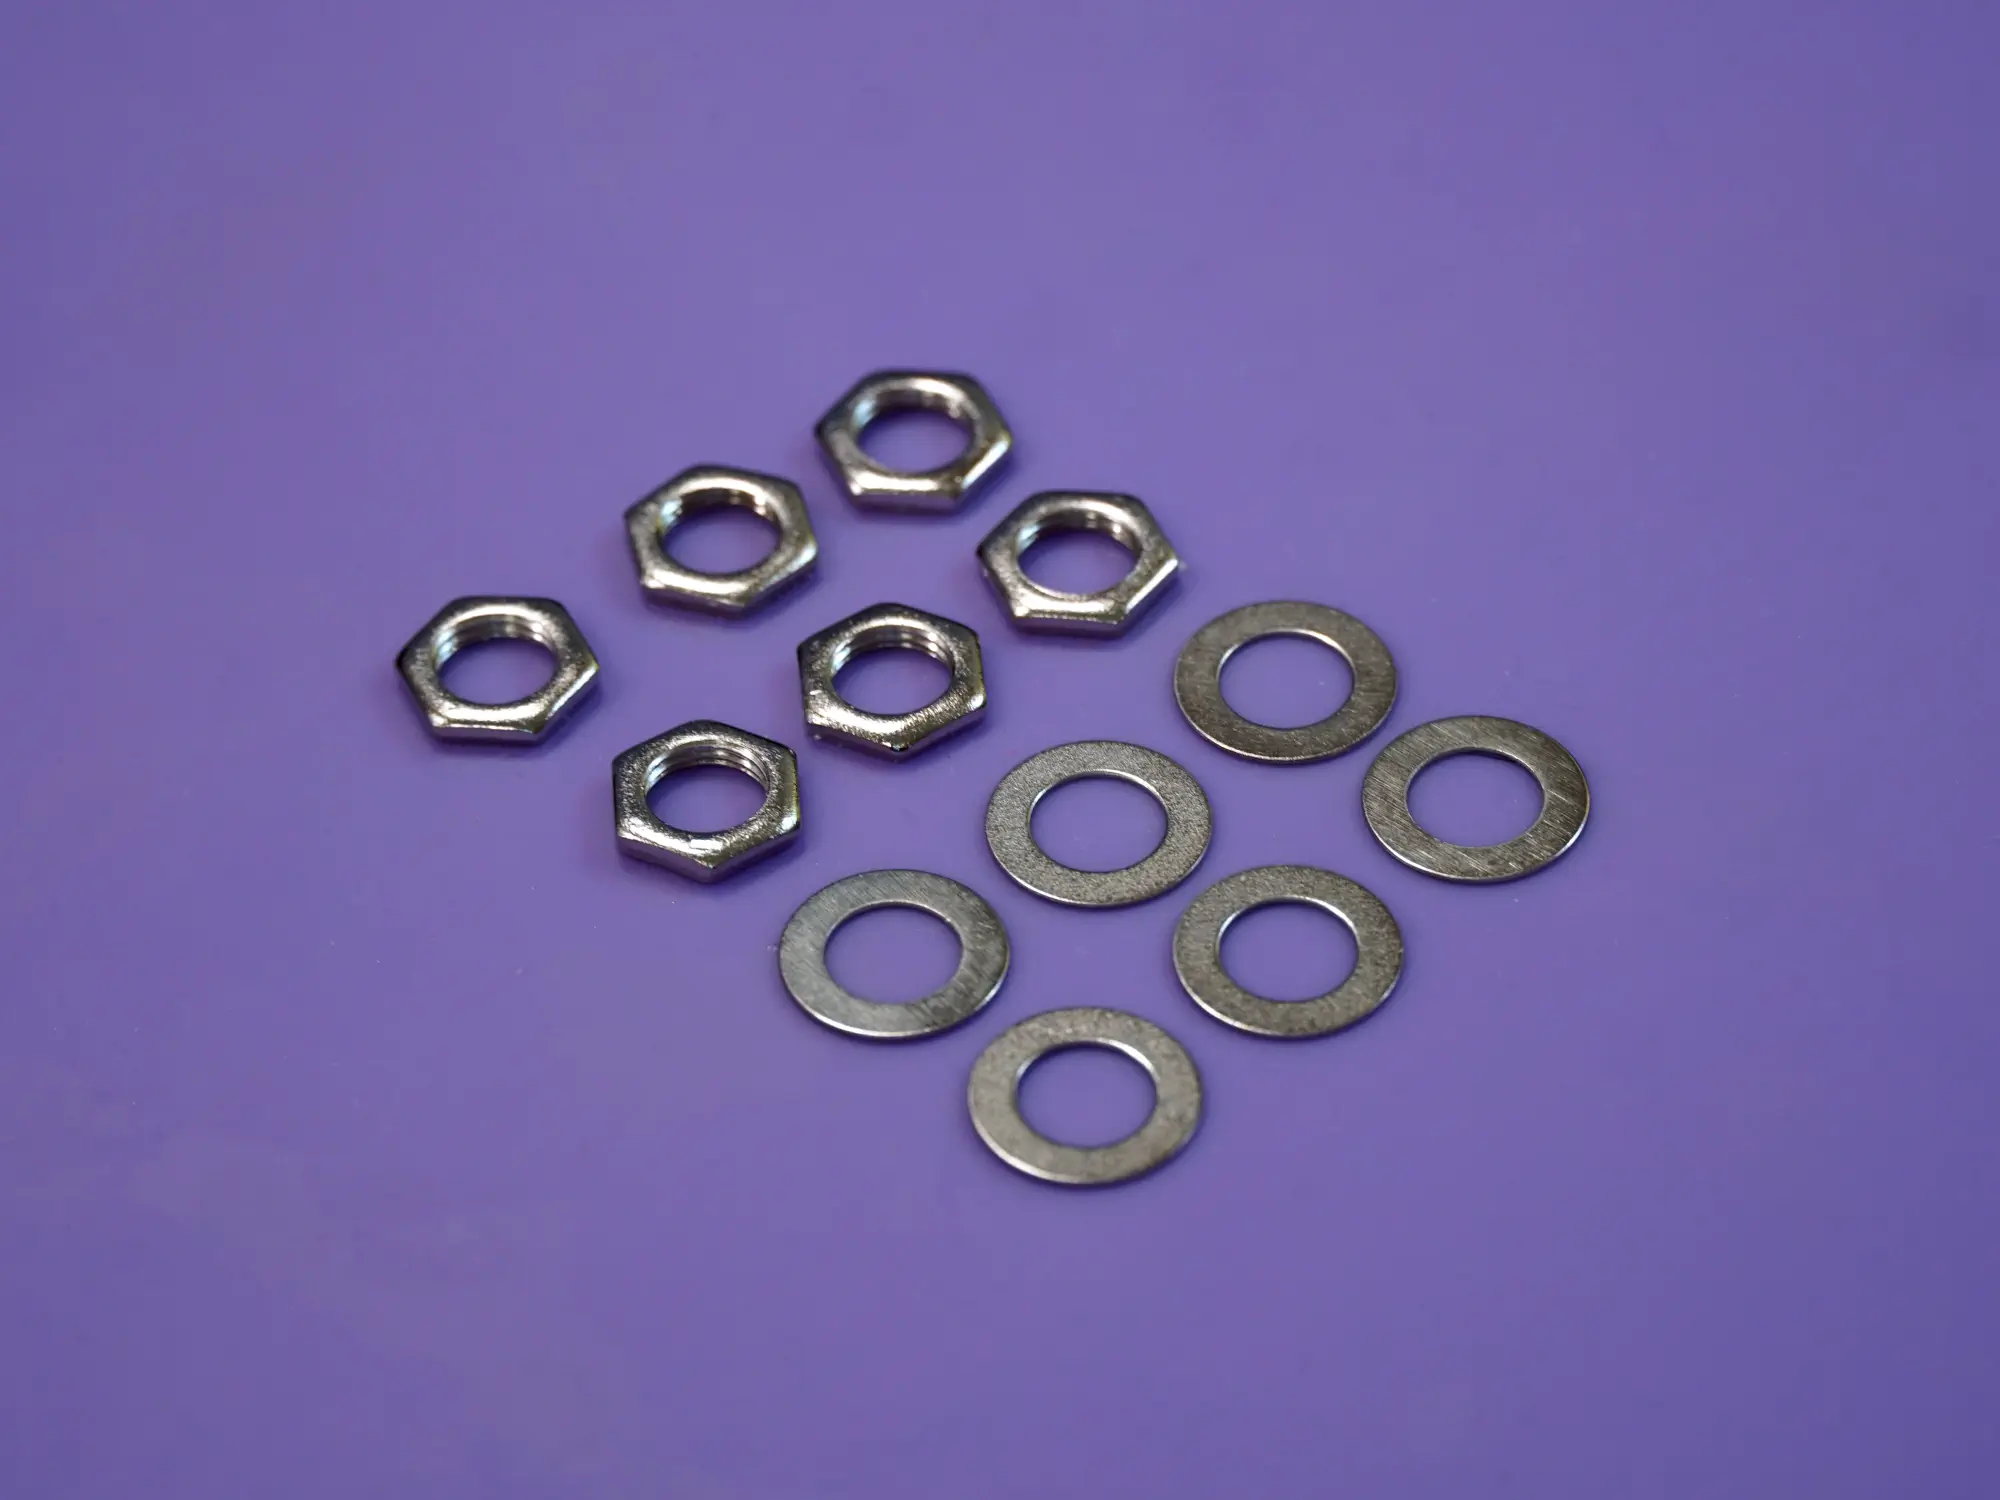 9mm pot nuts and washers